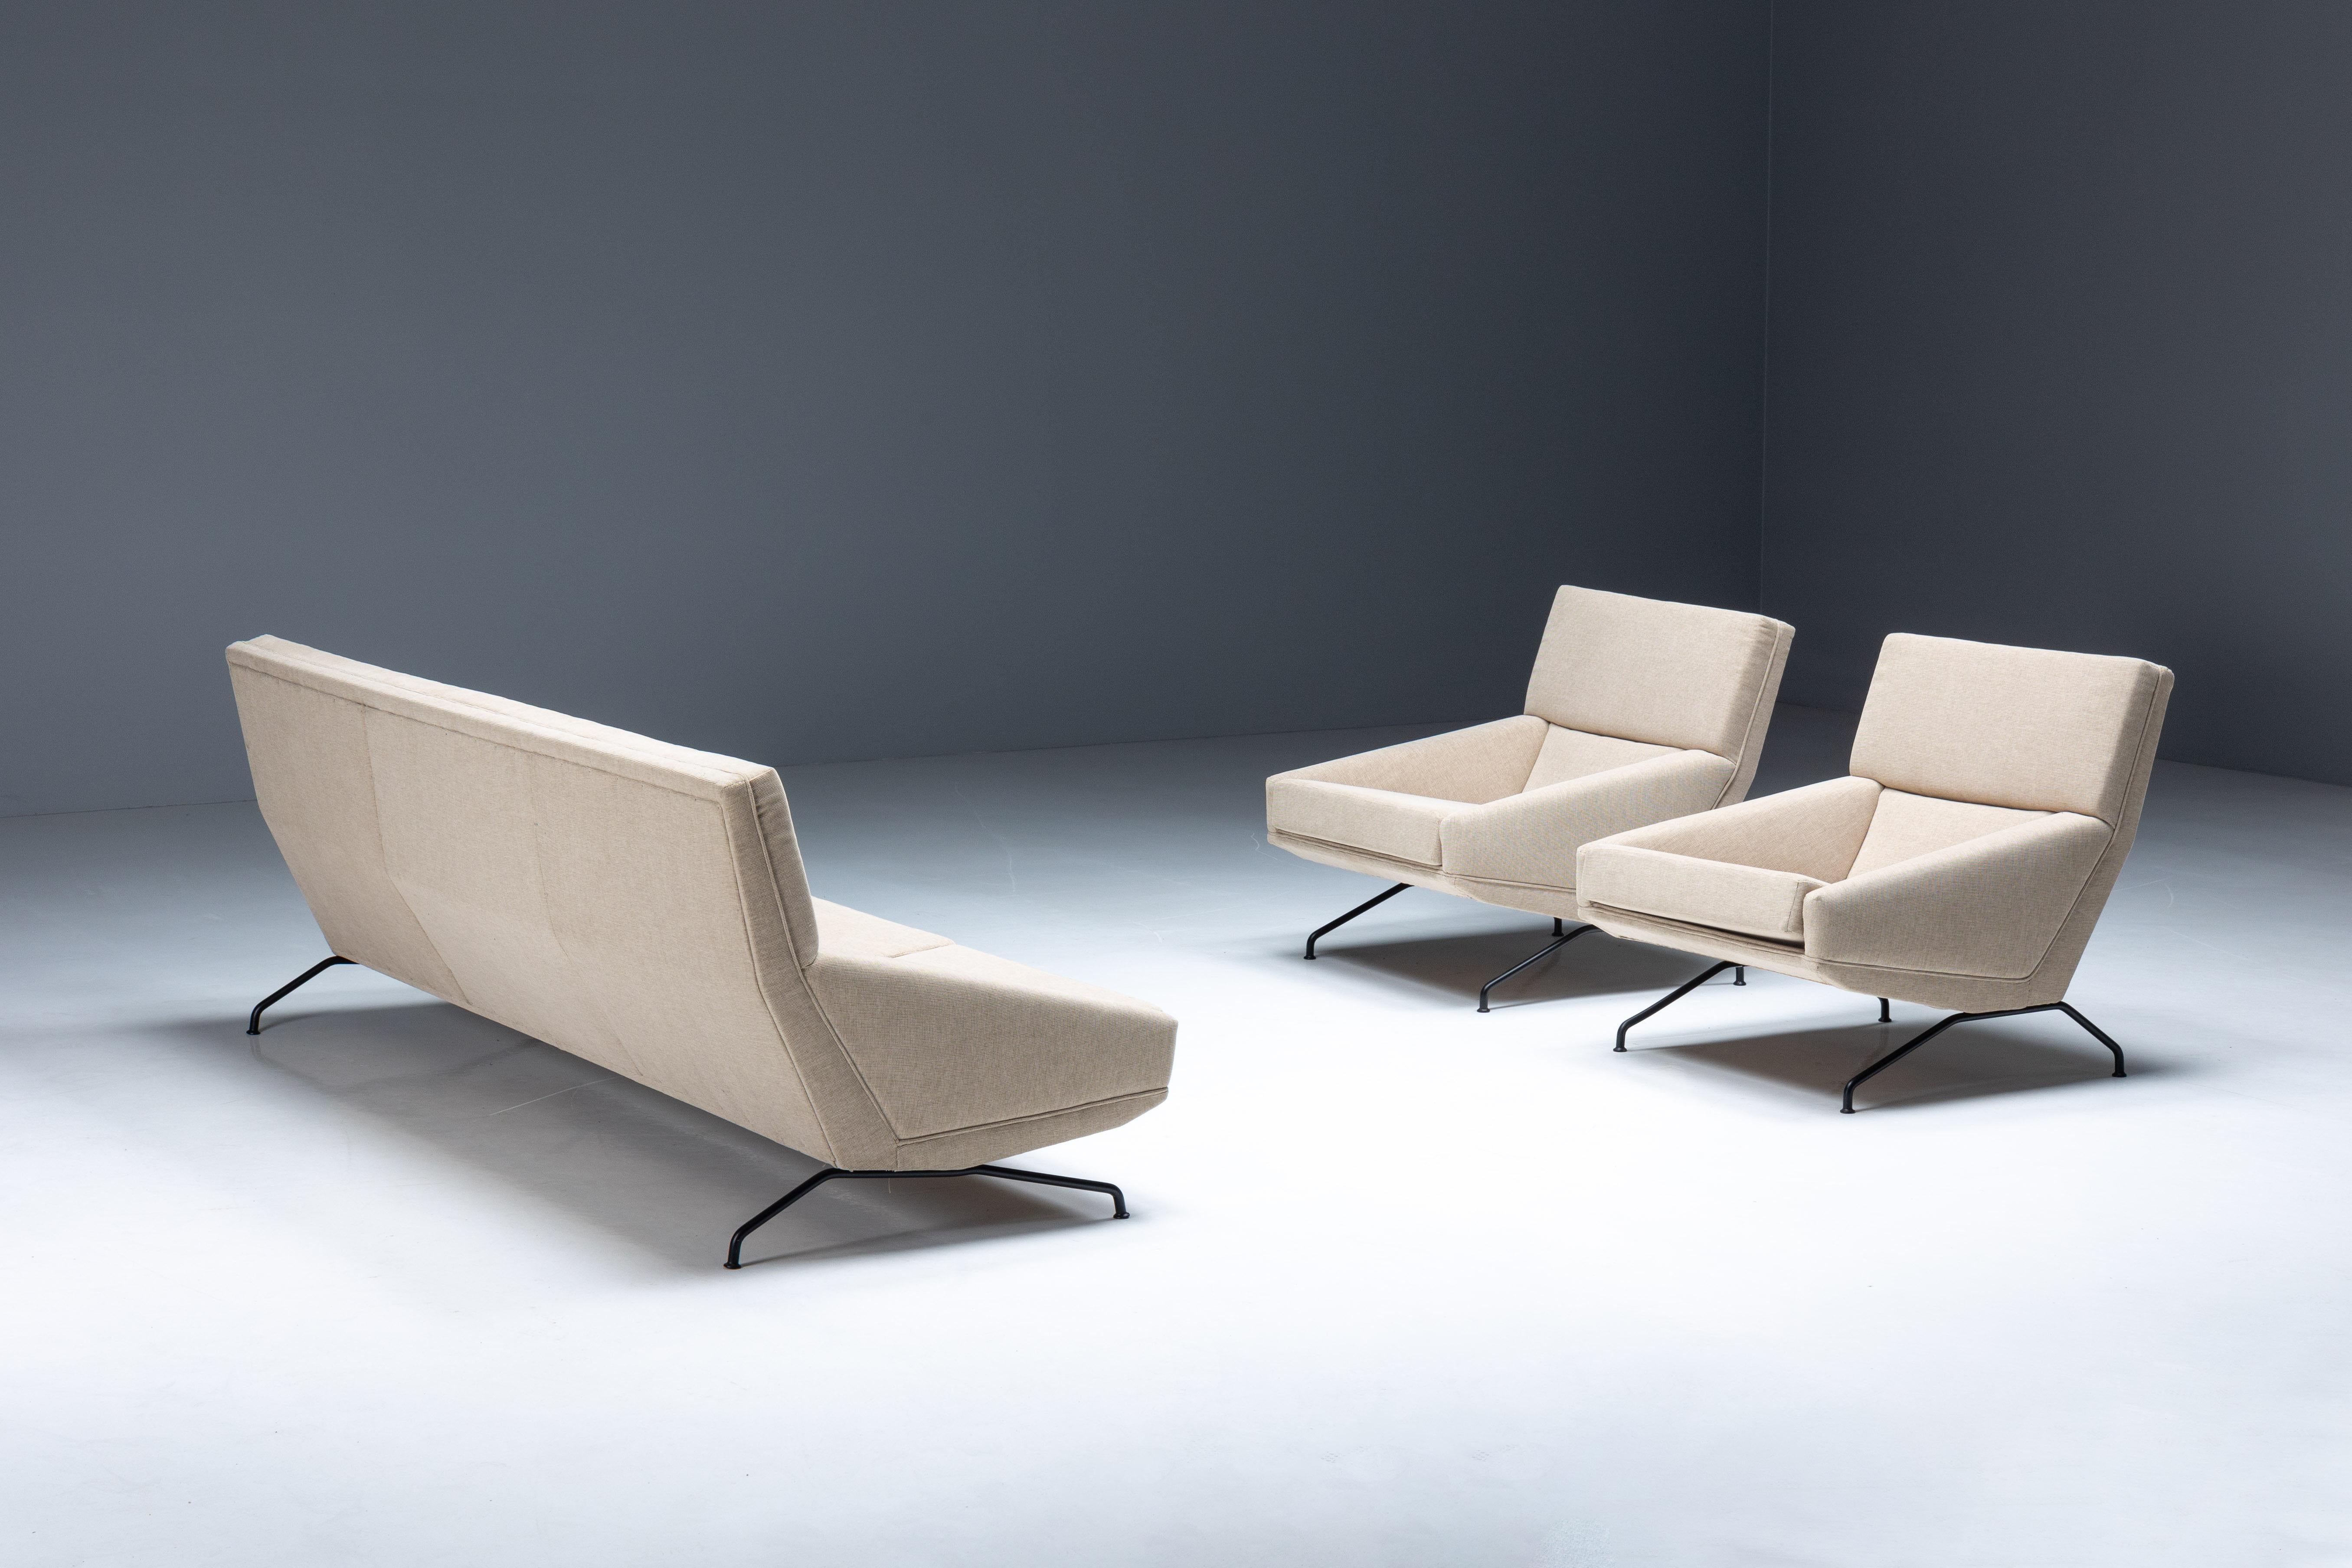 Lounge Chairs by Georges van Rijck for Beaufort, Belgium, 1960s For Sale 6